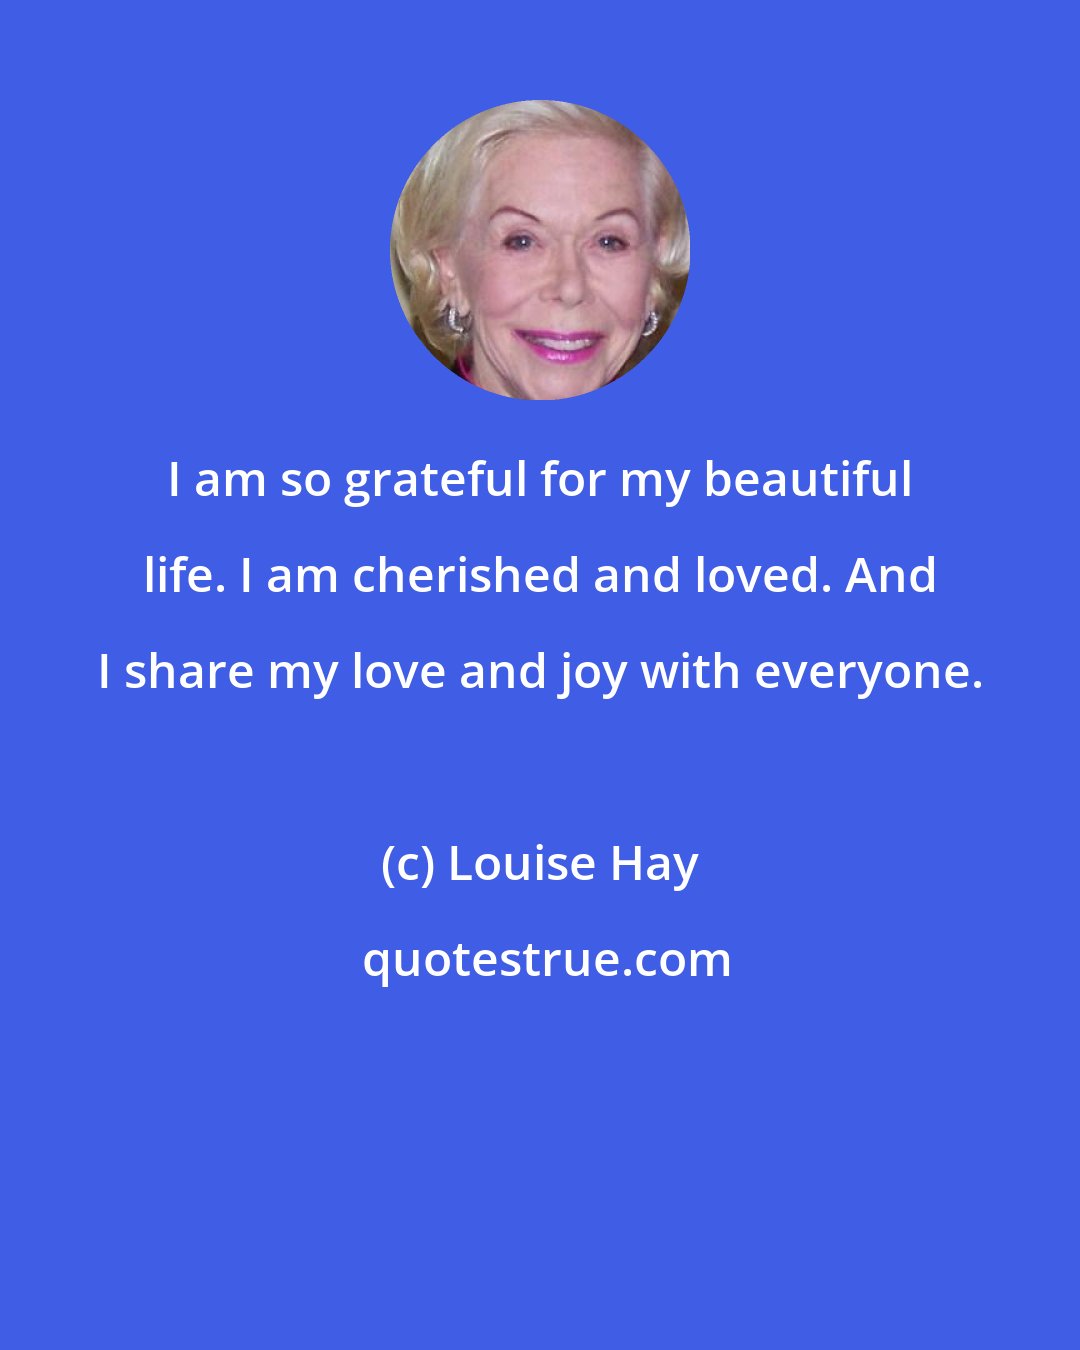 Louise Hay: I am so grateful for my beautiful life. I am cherished and loved. And I share my love and joy with everyone.